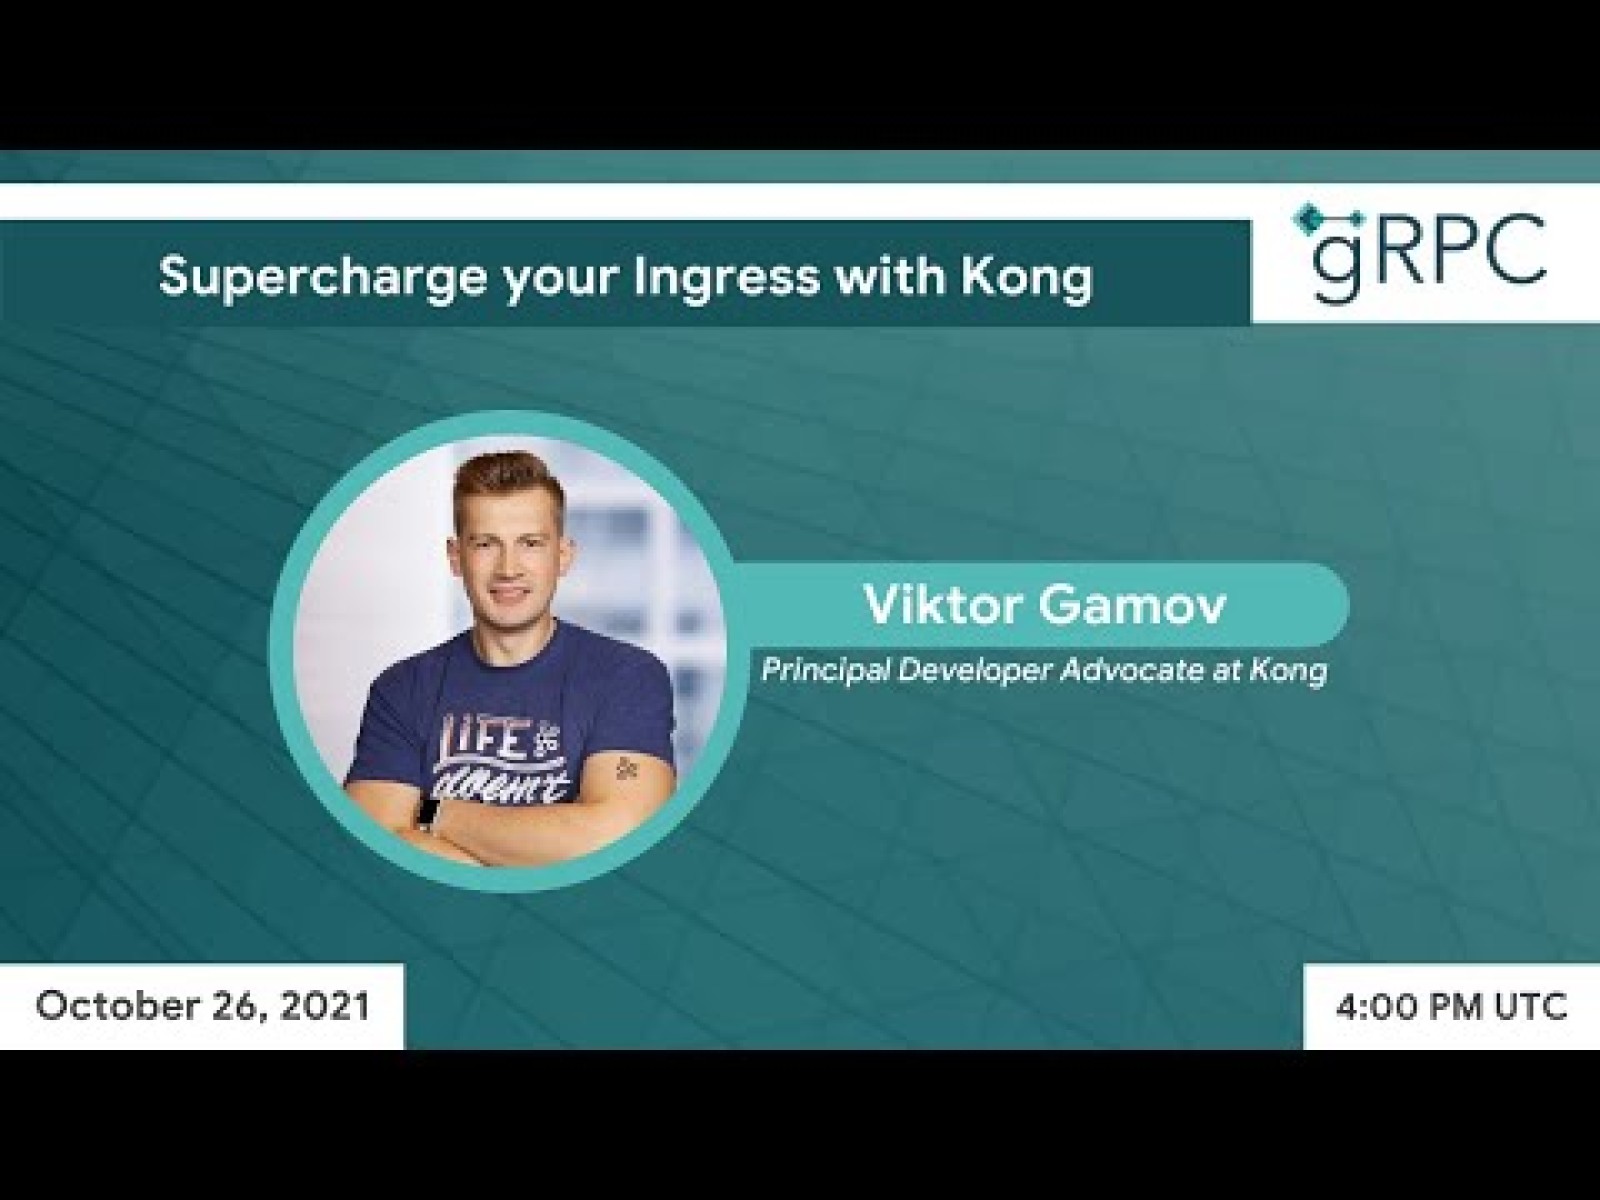 Supercharge your Ingress with Kong